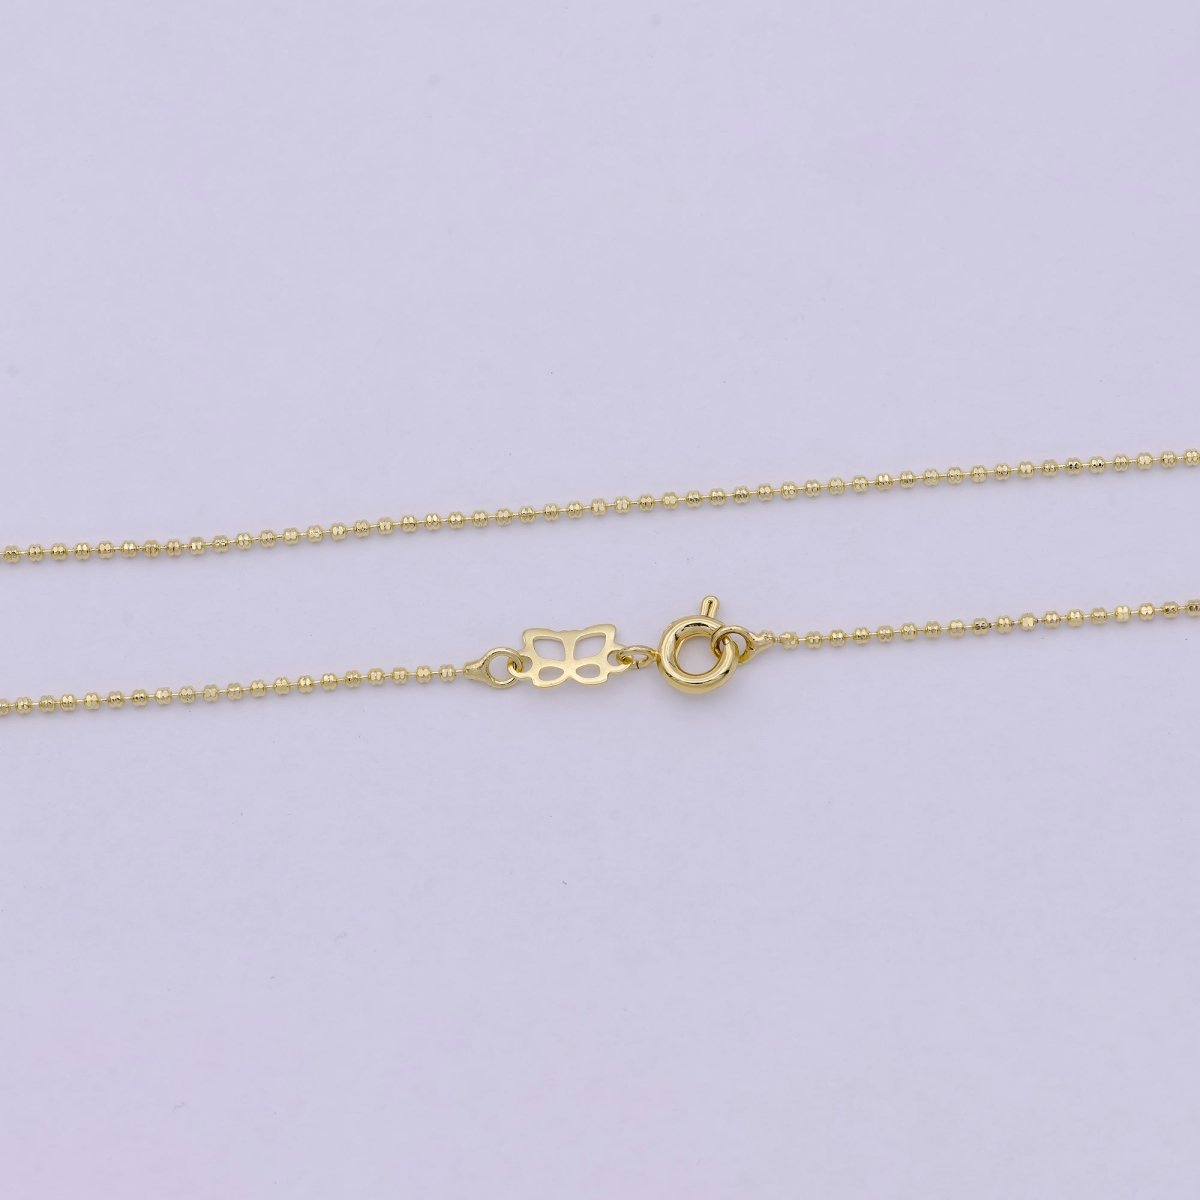 18 Inches Beaded Chain Necklace 14K Gold Filled Finished Chain Necklace, Dainty 1.1mm Bead Necklace w/ Spring Ring | WA-533 Clearance Pricing - DLUXCA